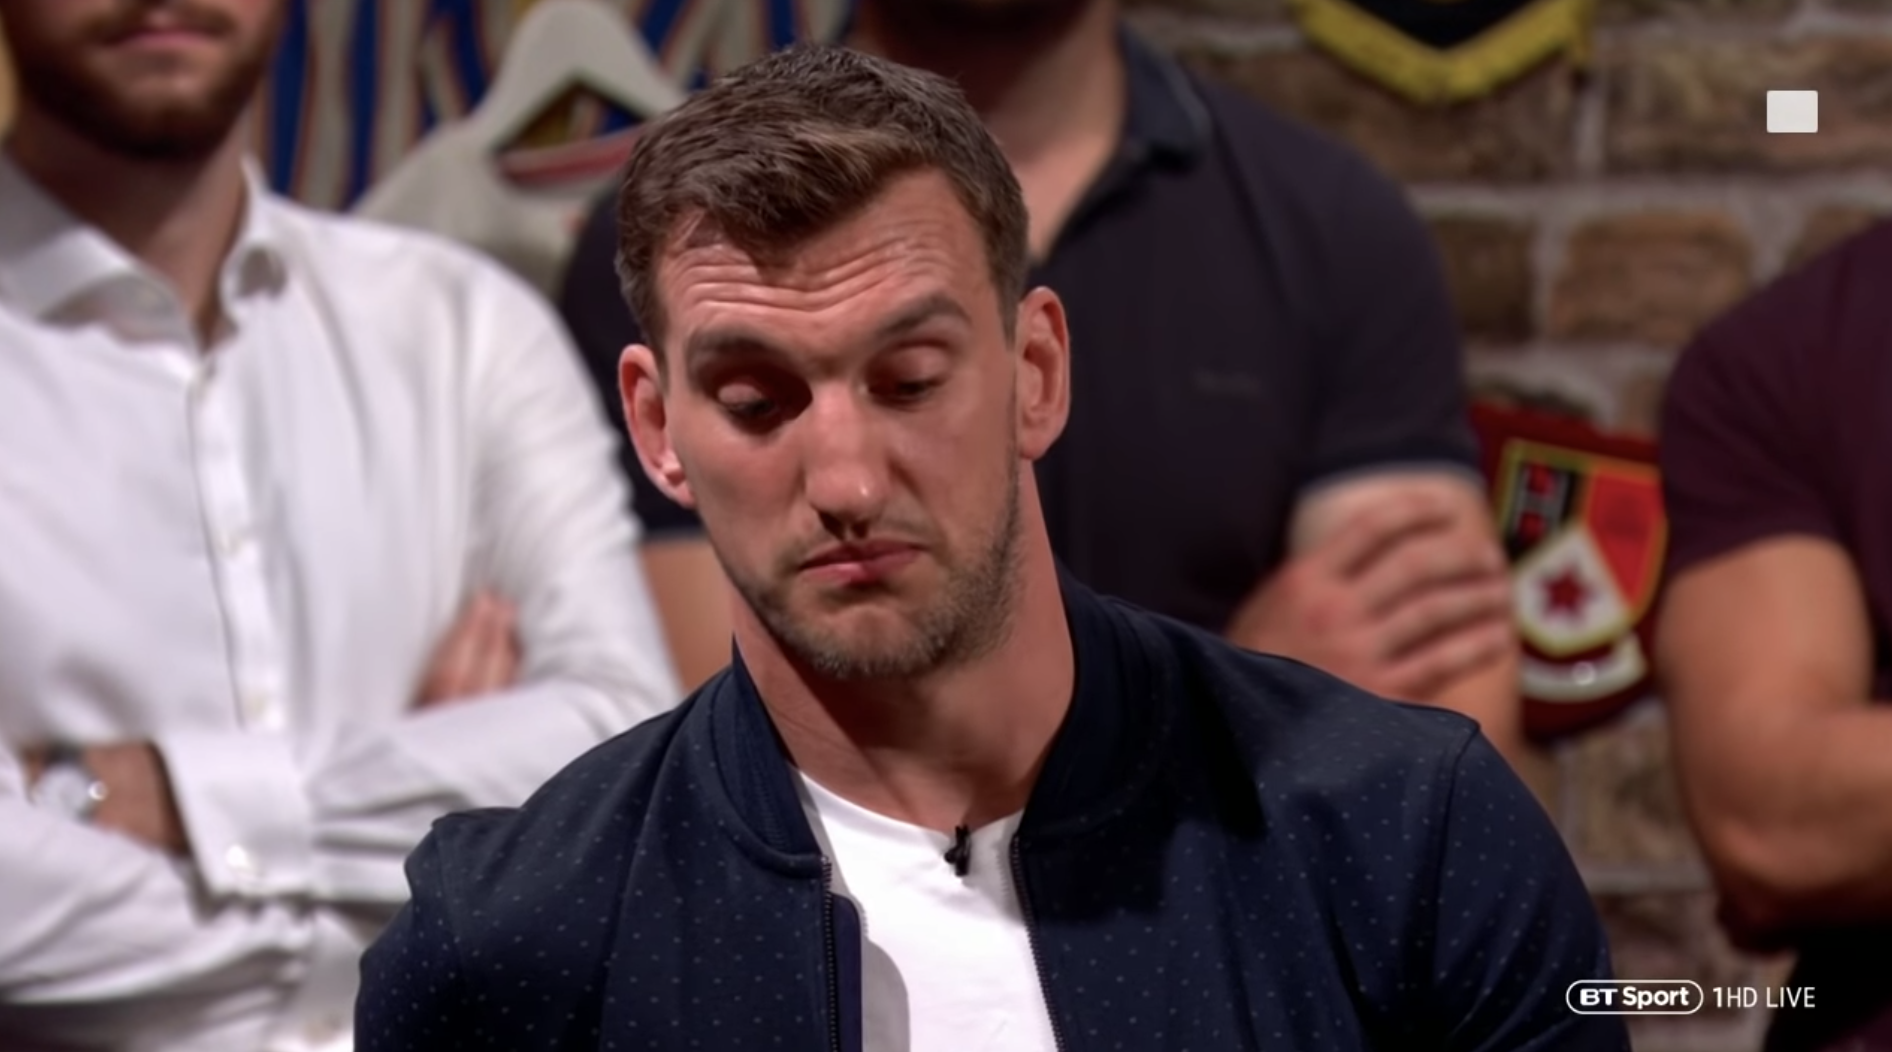 VIDEO: Sam Warburton gives a surprisingly honest interview on what it is like to retire from Rugby